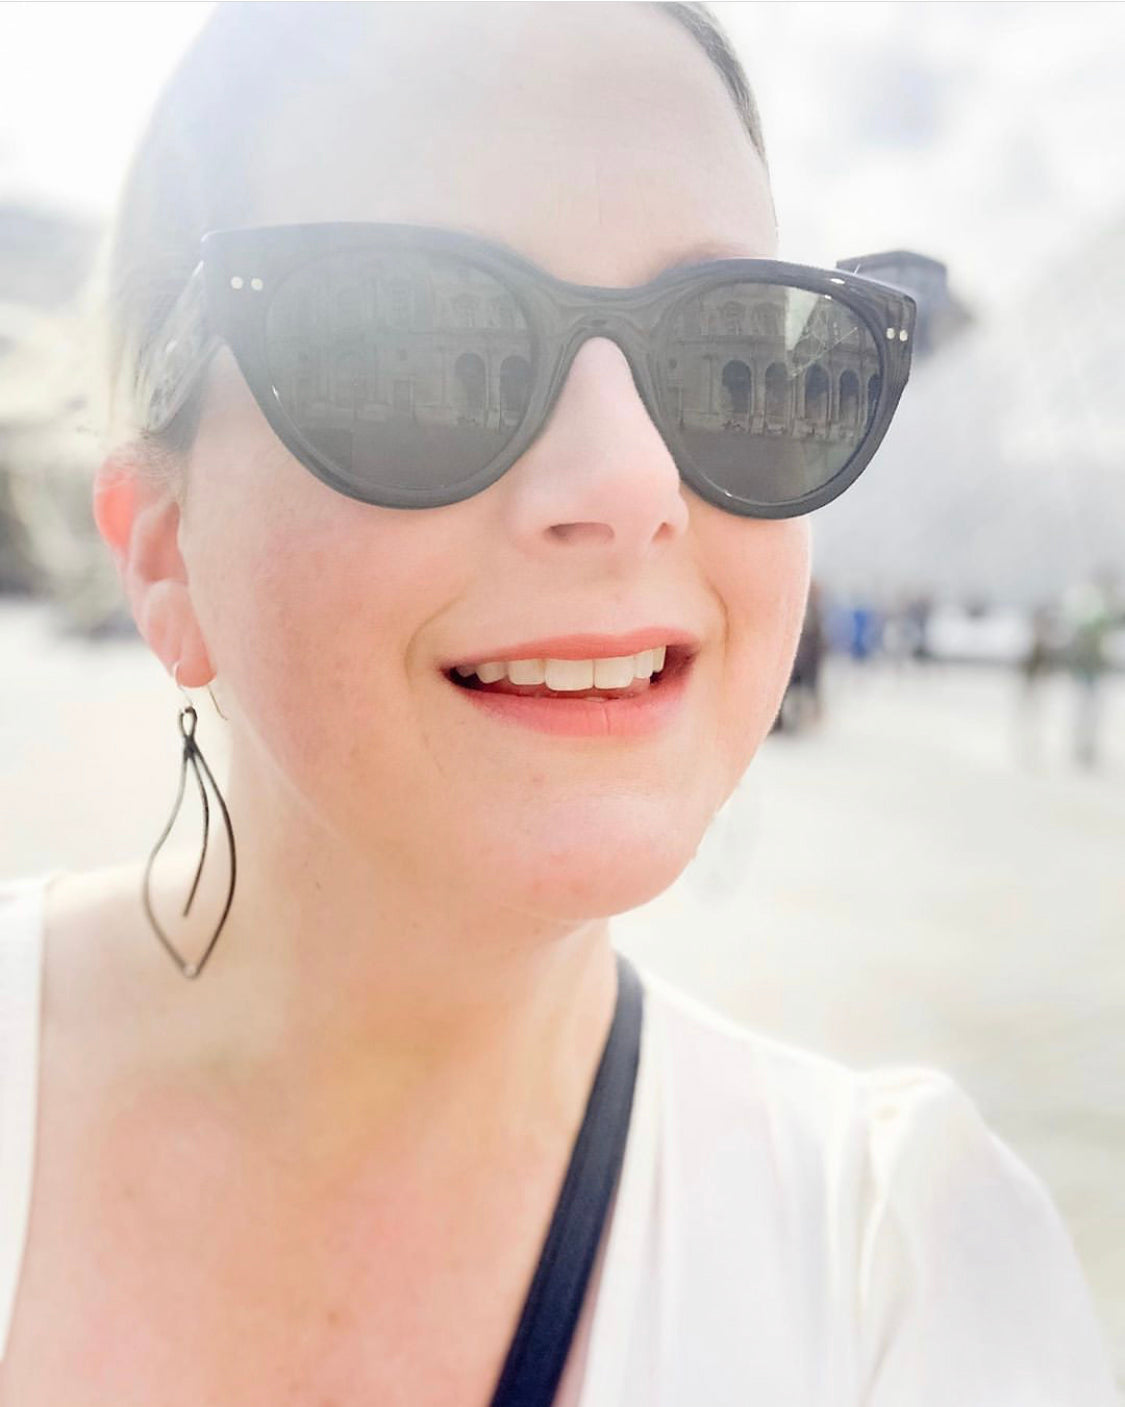 The Fleur earrings are the perfect addition to your travel wardrobe.  Whether you're wandering the streets of Paris or just wandering down to your local coffee shop, these lightweight durable earrings go where you go!